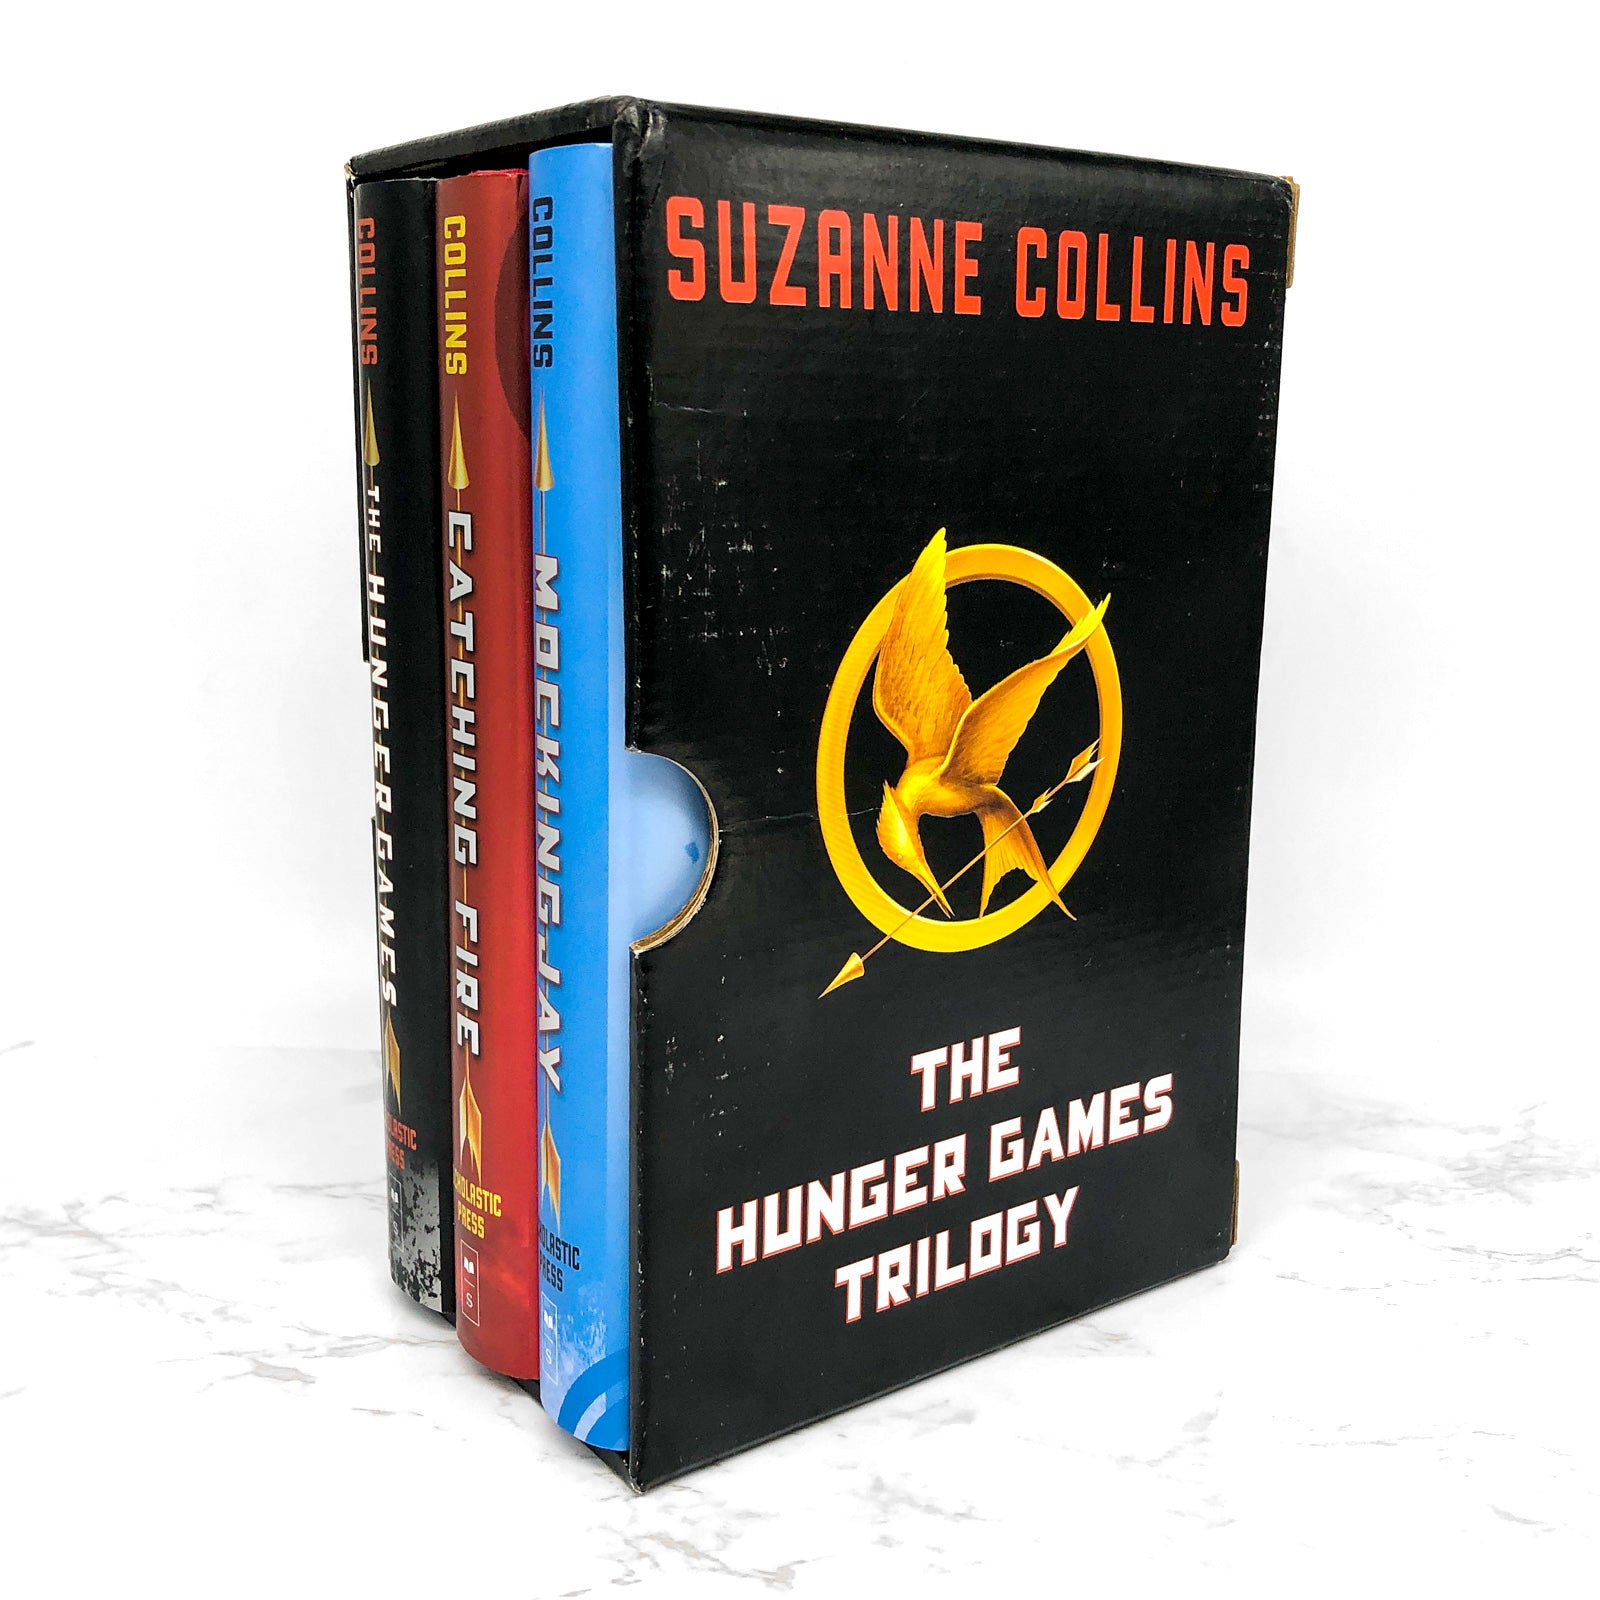 Hunger Games Trilogy Series Books 1 - 3 Collection Classic Box Set by  Suzanne Collins (The Hunger Games, Catching Fire & Mockingjay)